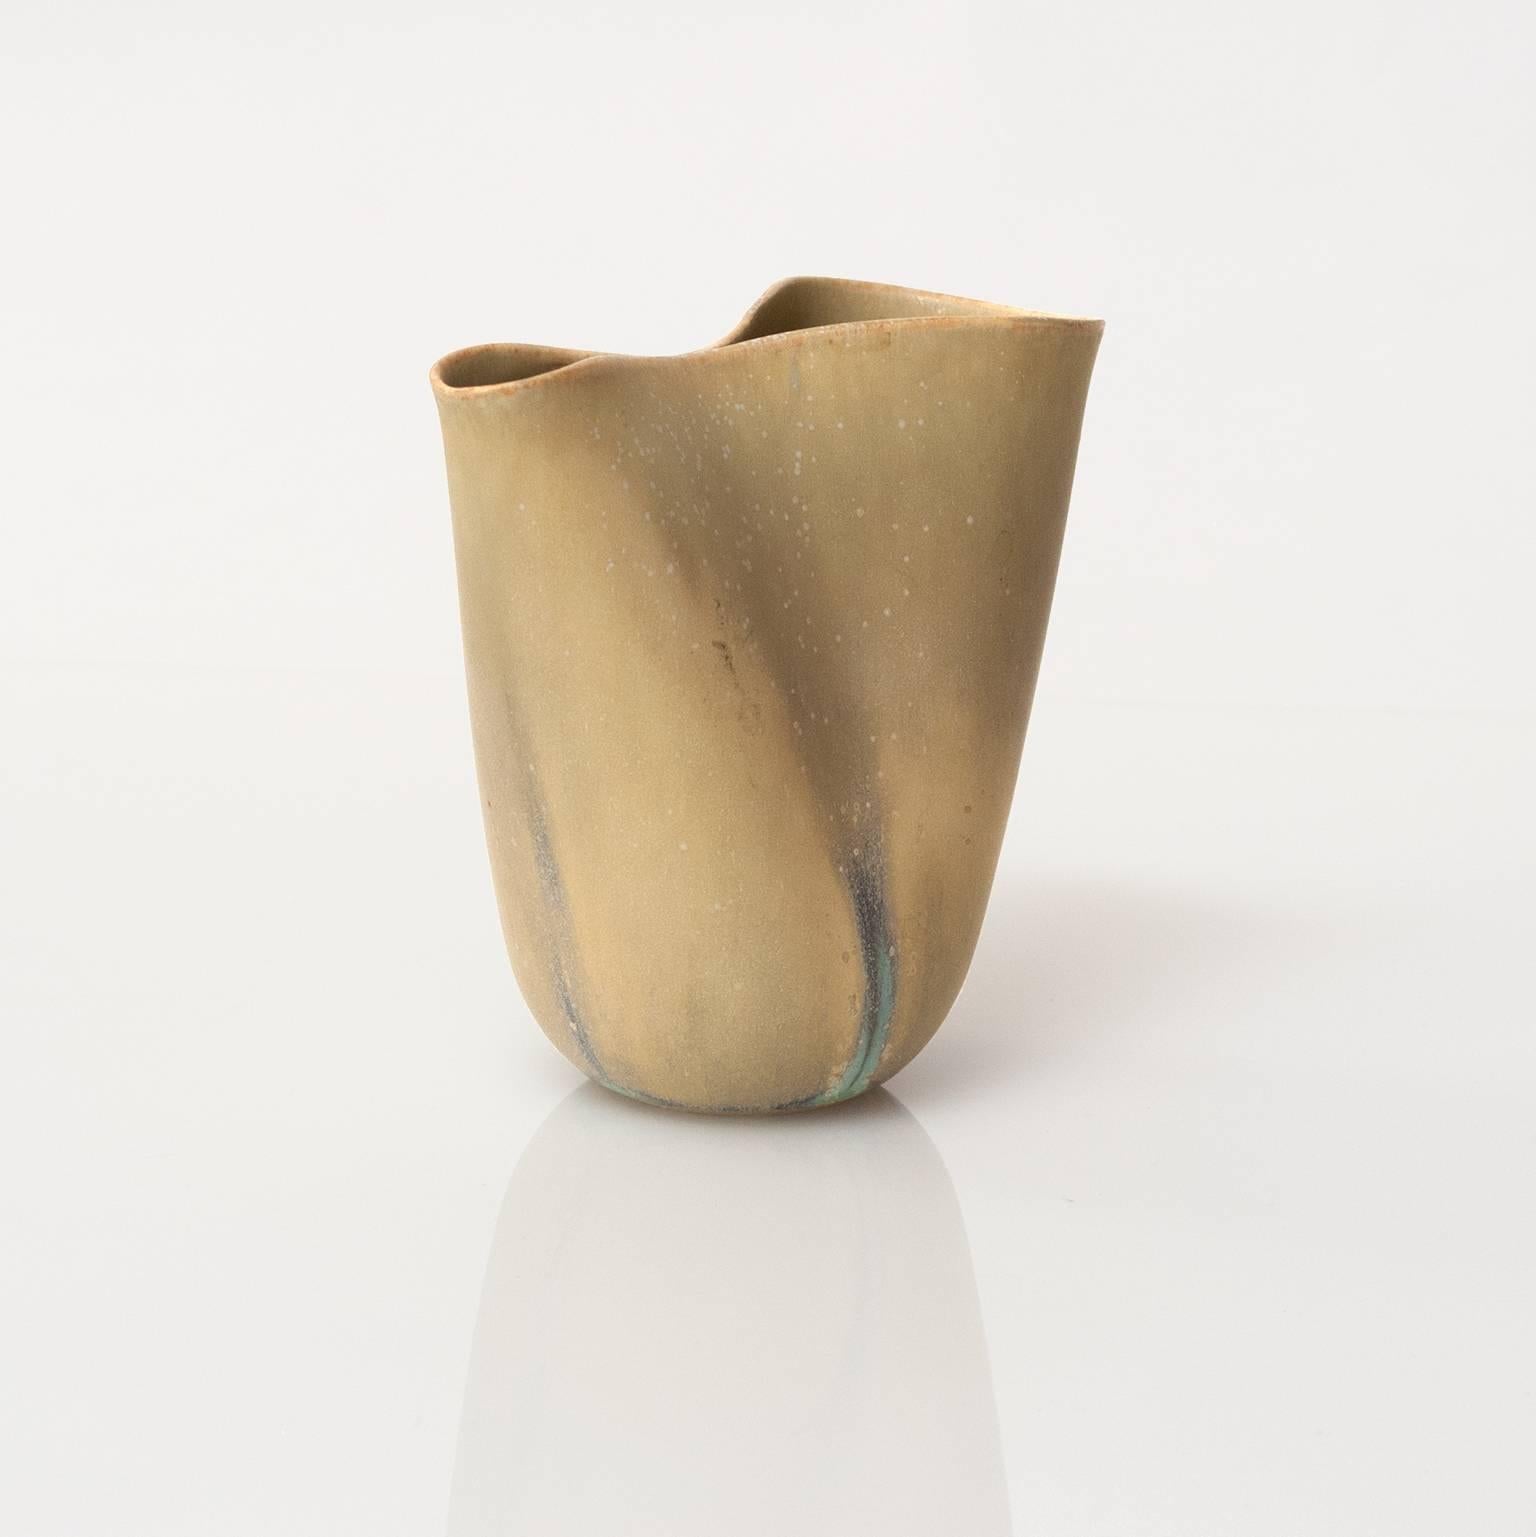 A rare golden glazed "Veckla" vase by famed ceramicist artist Stig Lindberg. The  vase has a soft form shape and a pinched center. The Veckla line by Lindberg was done primary in a matt white glazed. The mottled glaze has areas of light